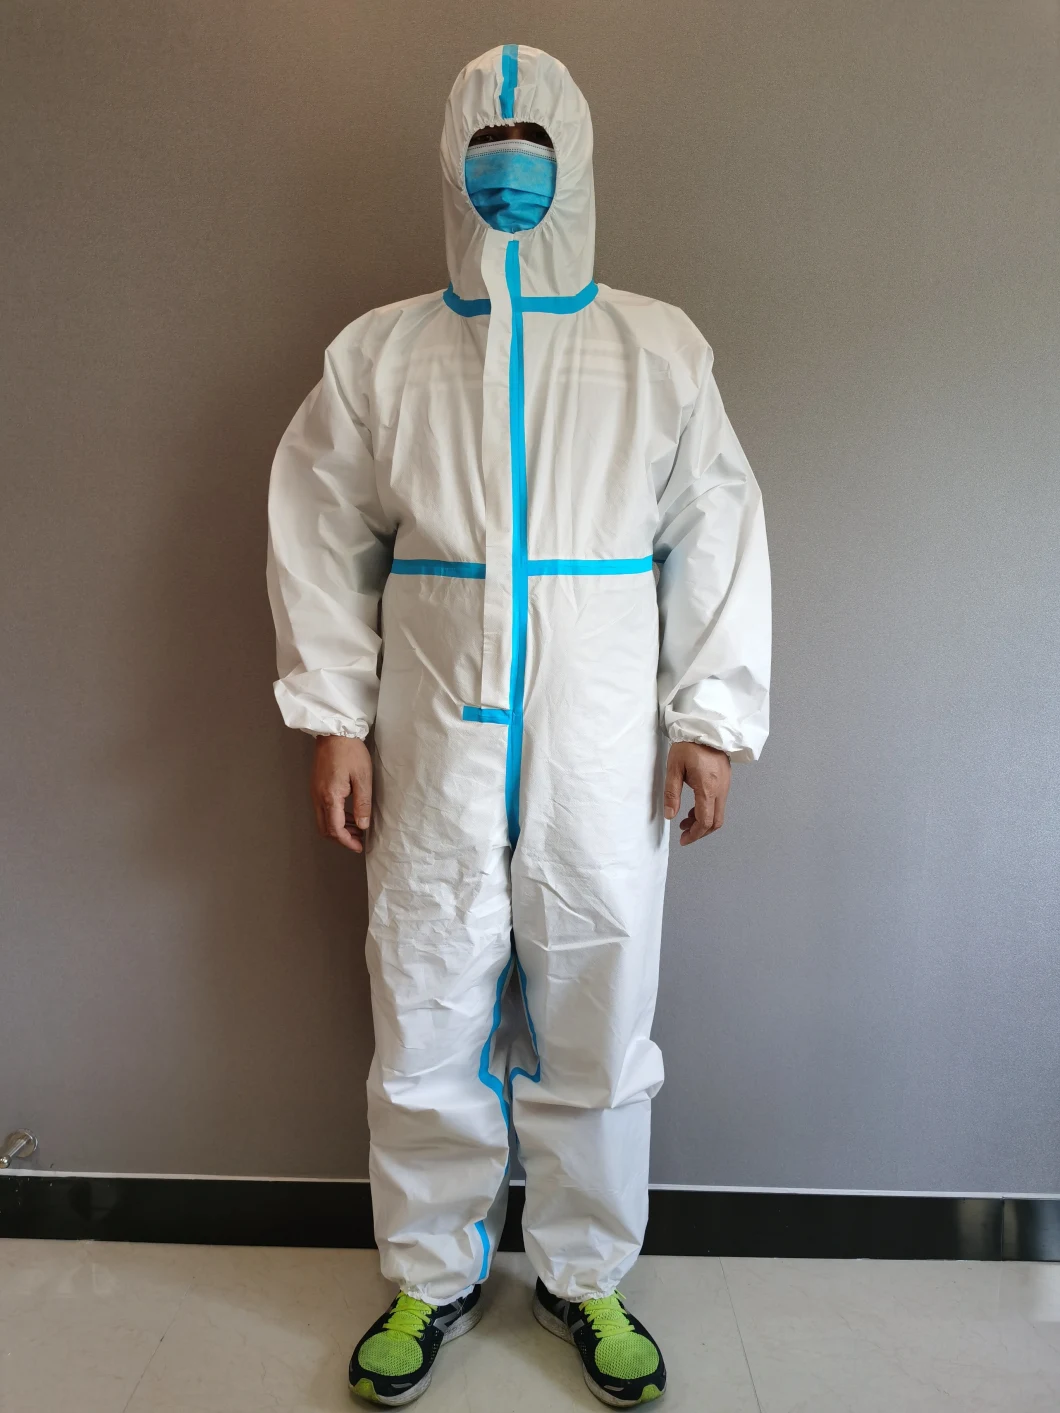 Disposable Personal Protective Clothing Equipment Protective Suits Coverall Ce/FDA Not Medical Using Tpye 4